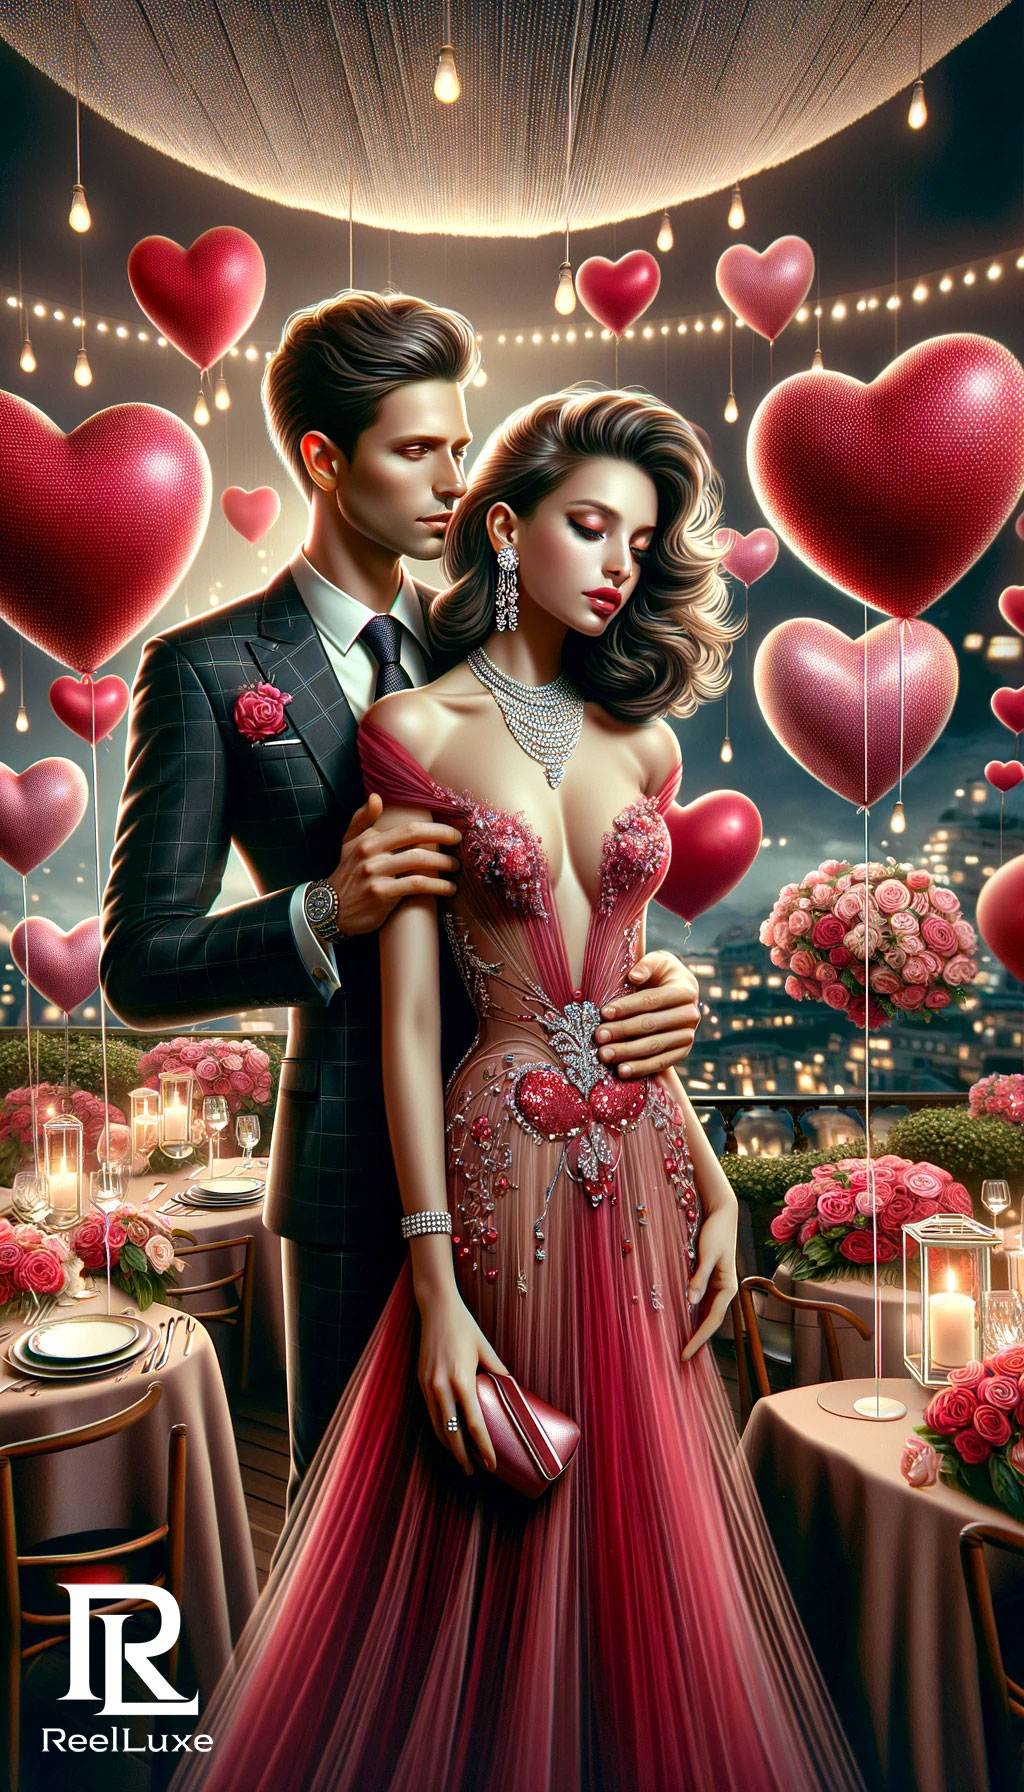 Romance in the Air – Valentine’s Day – Beauty and Fashion – Dinner Date – 2